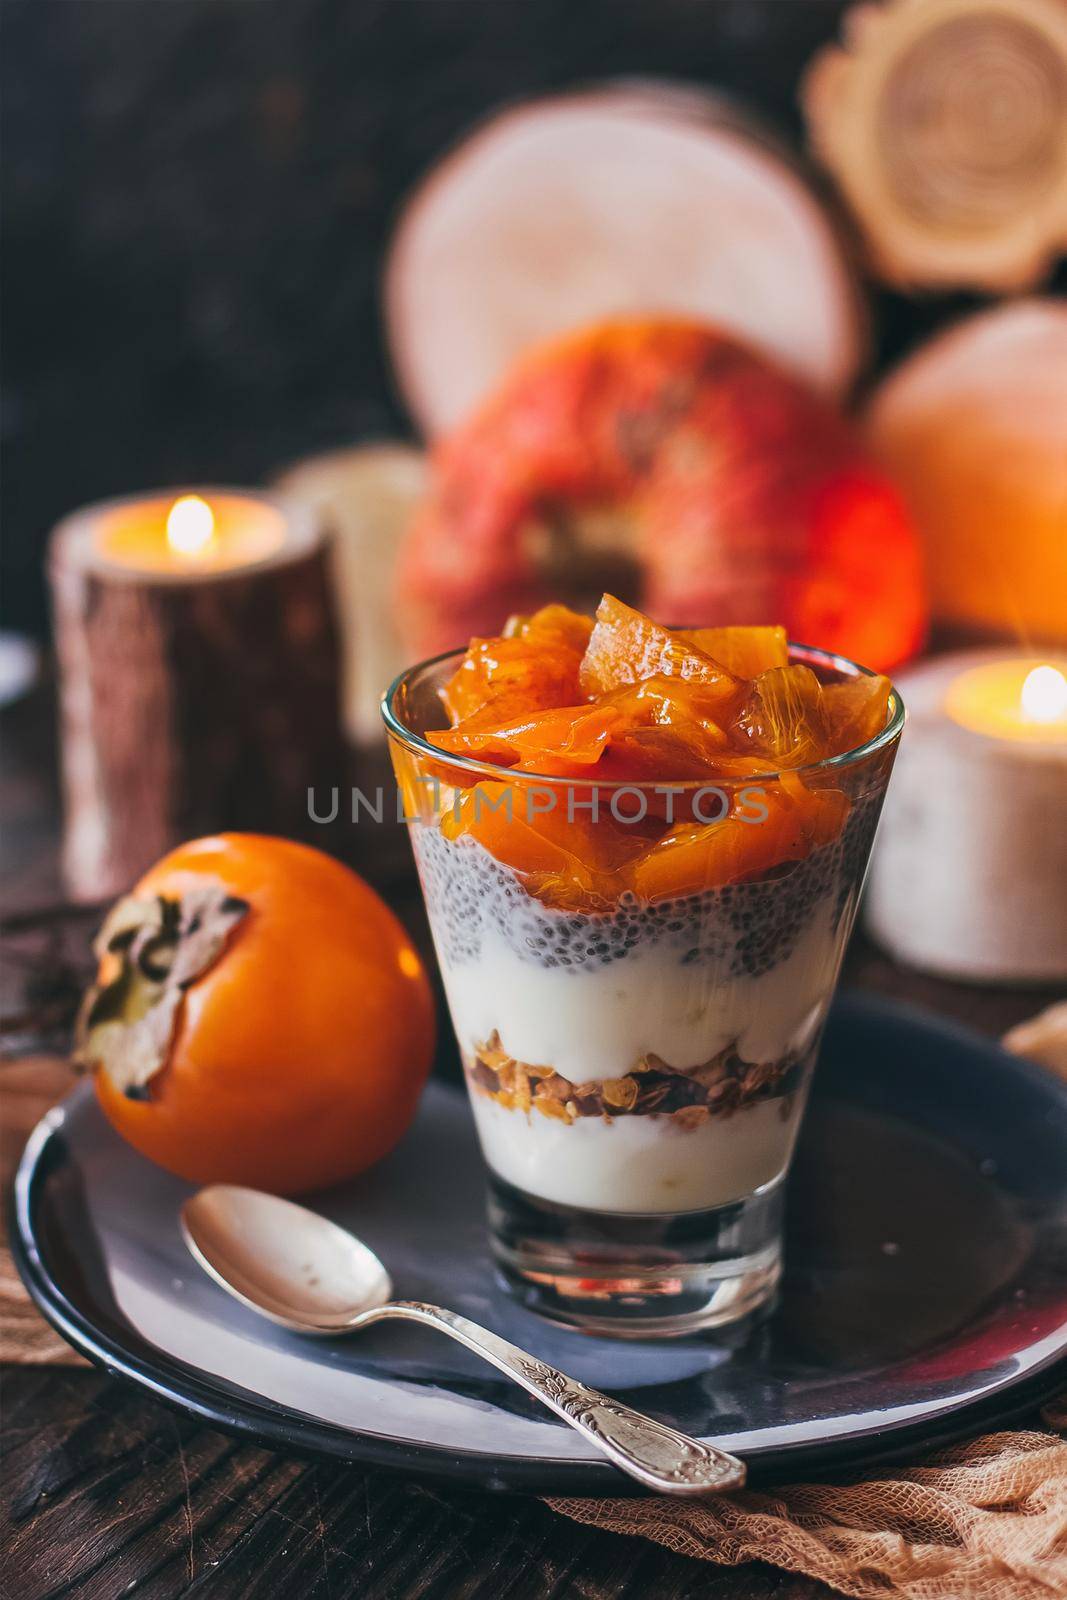 Delicious breakfast: chia seed pudding and persimmon close up in a glass on the table. vertical by mmp1206